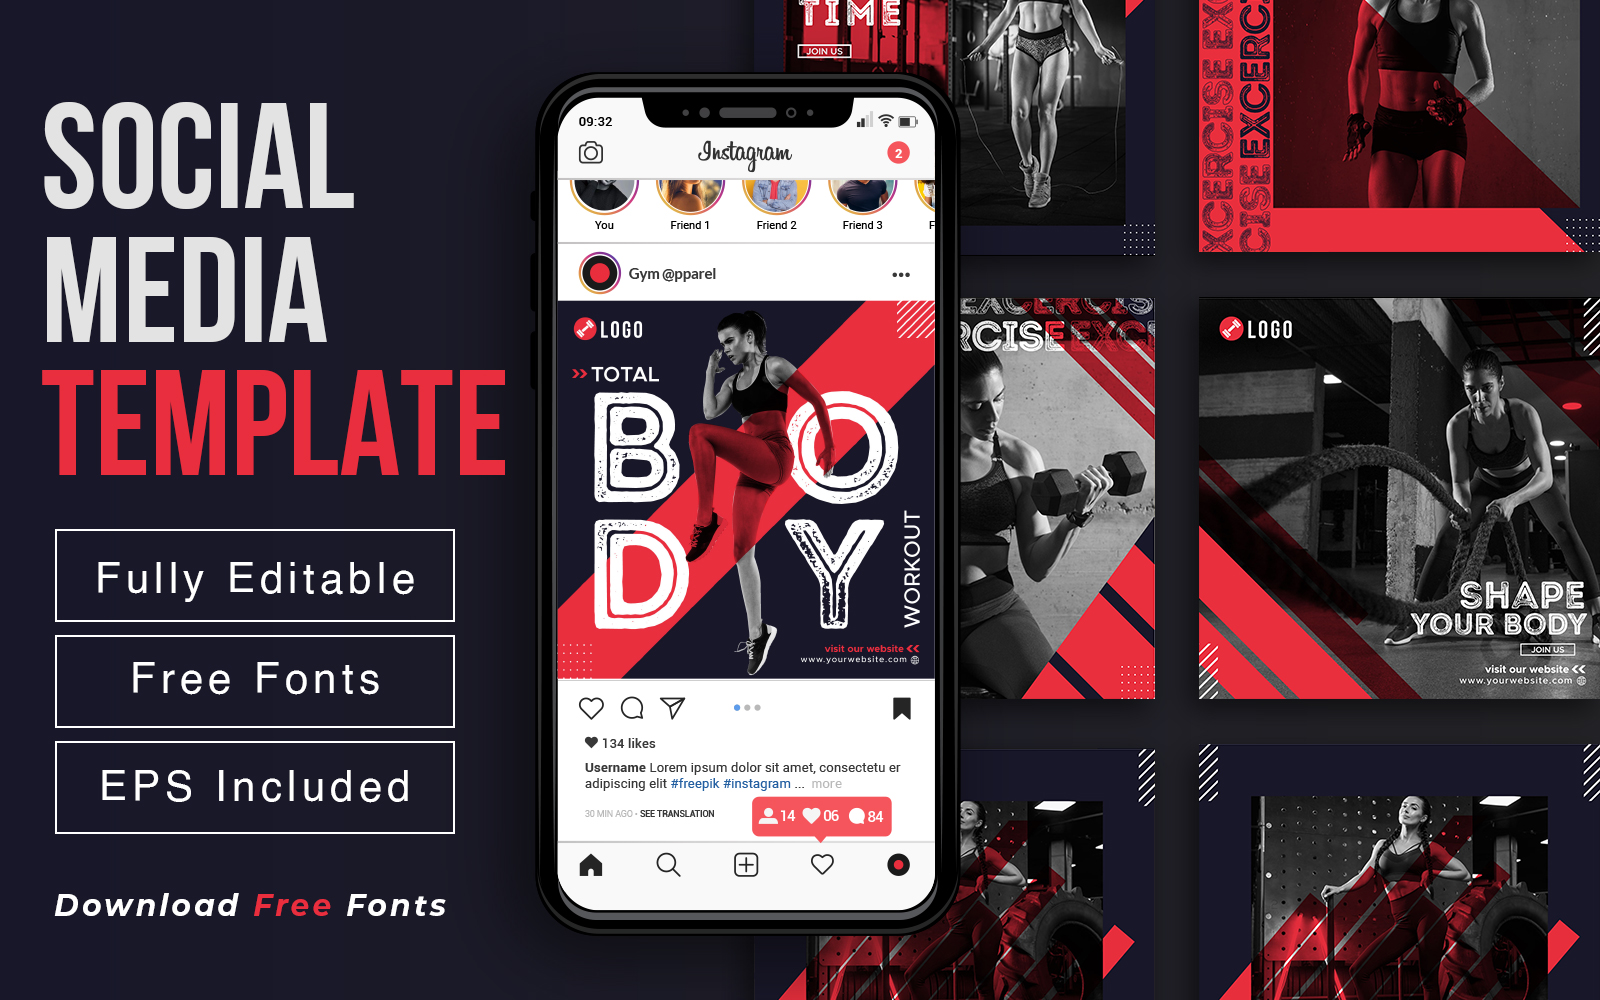 Fitness And Workout Social Media Posts-Instagram Promotional Ad Template Design